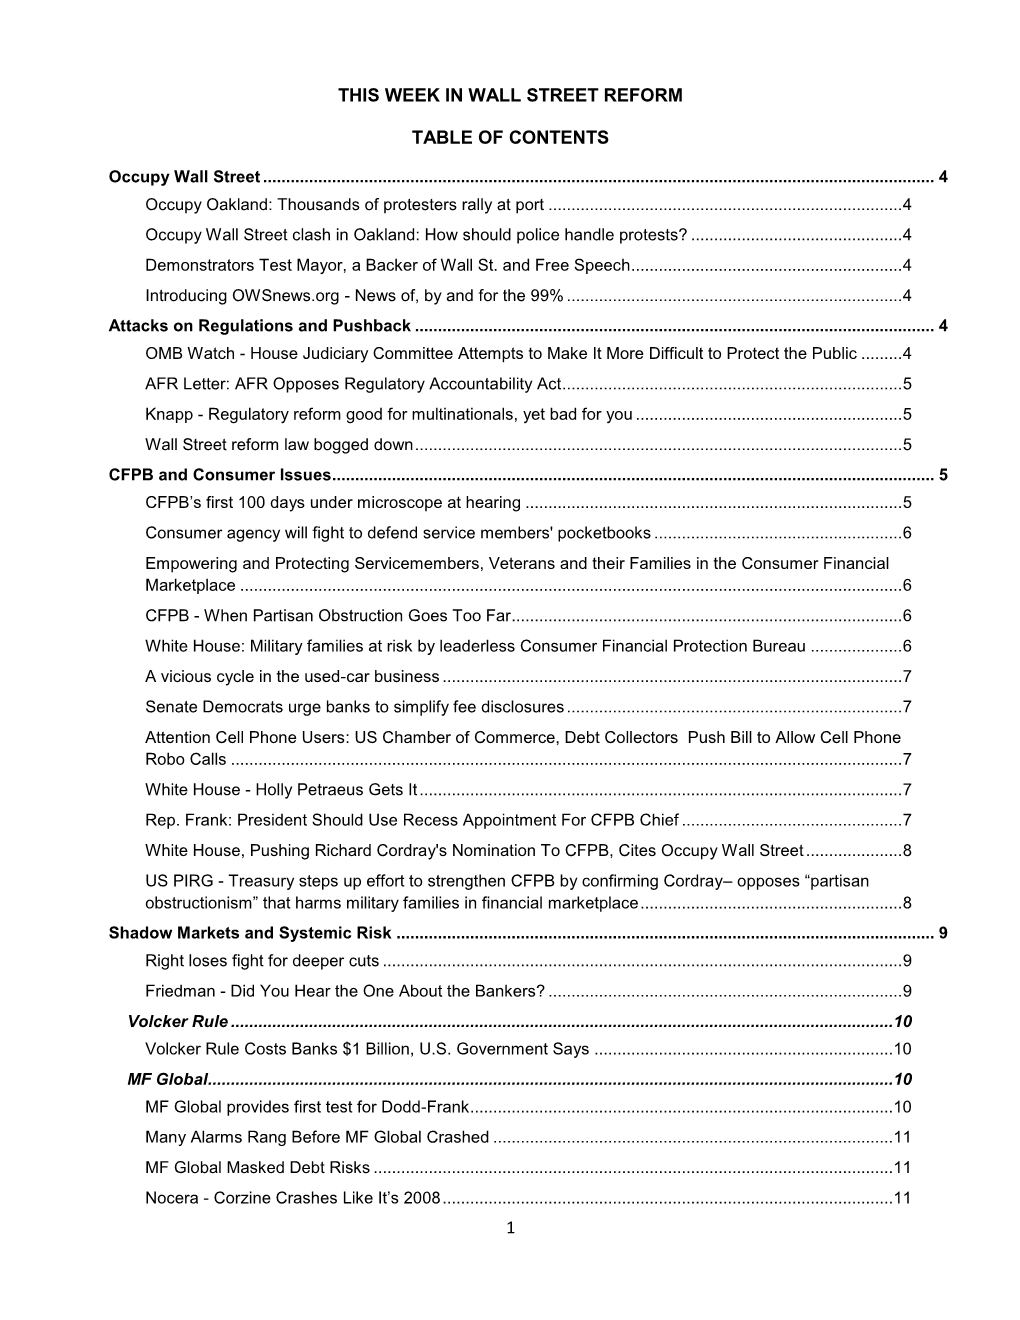 1 This Week in Wall Street Reform Table of Contents